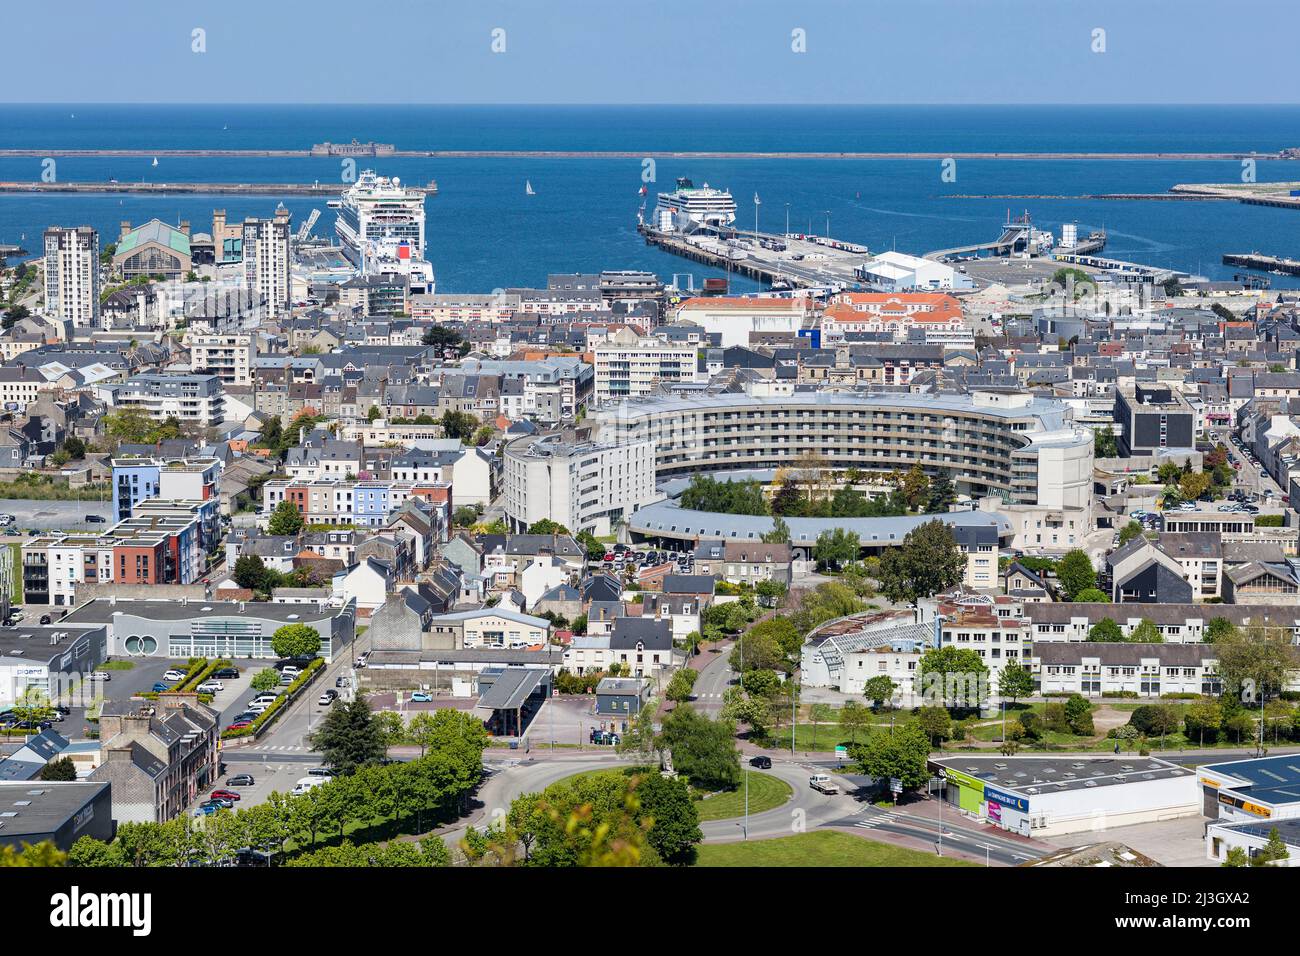 France, Manche, Cotentin, Cherbourg-Octeville, general view of the Cotentien Public Health Center, the Cité de la Mer museum with cruise ship MS Azura at quay, the ferry terminal and the residential areas Stock Photo